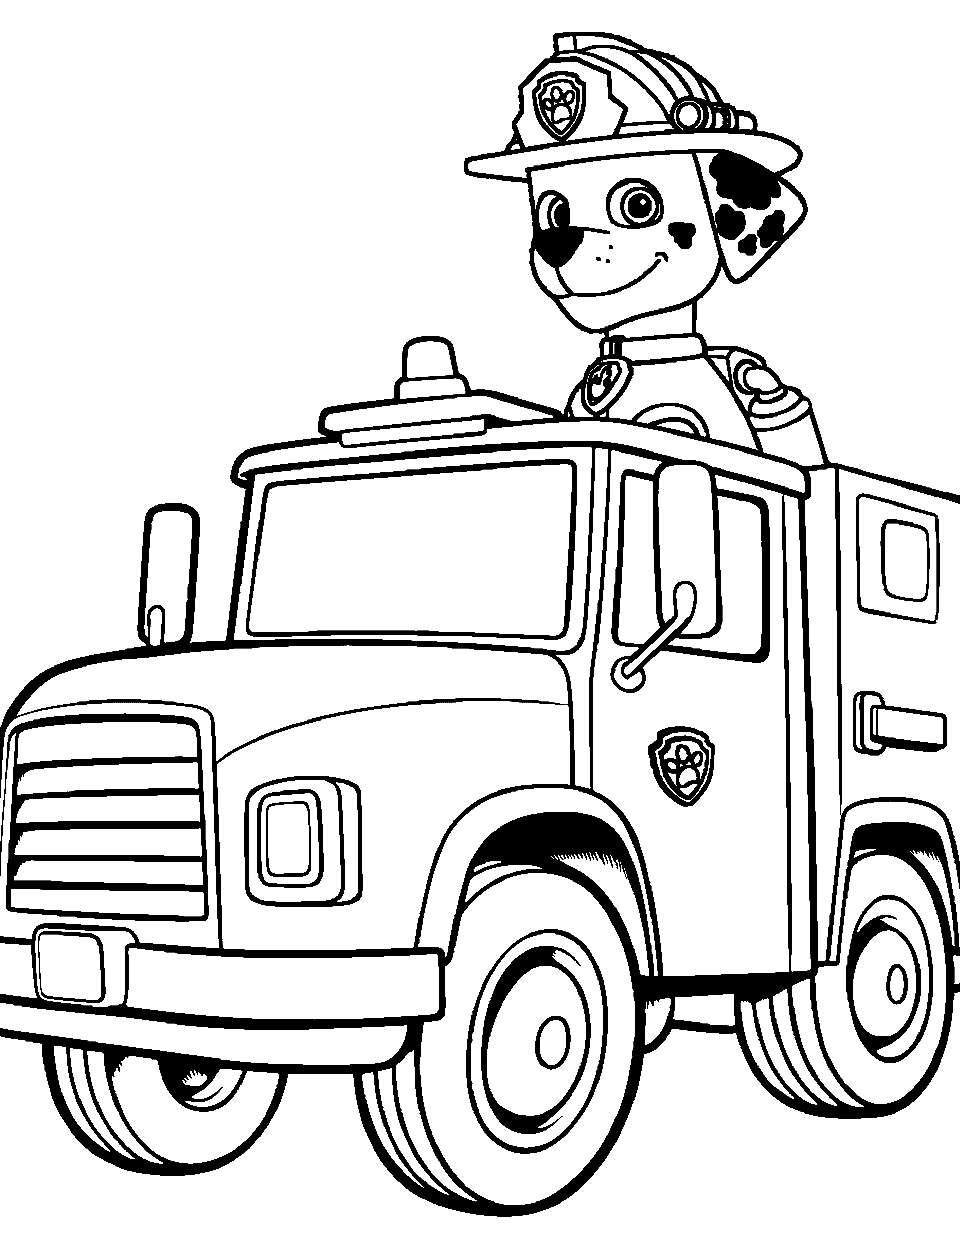 Paw Patrol's Fire Truck Rescue Coloring Page - A Paw Patrol-themed fire truck.